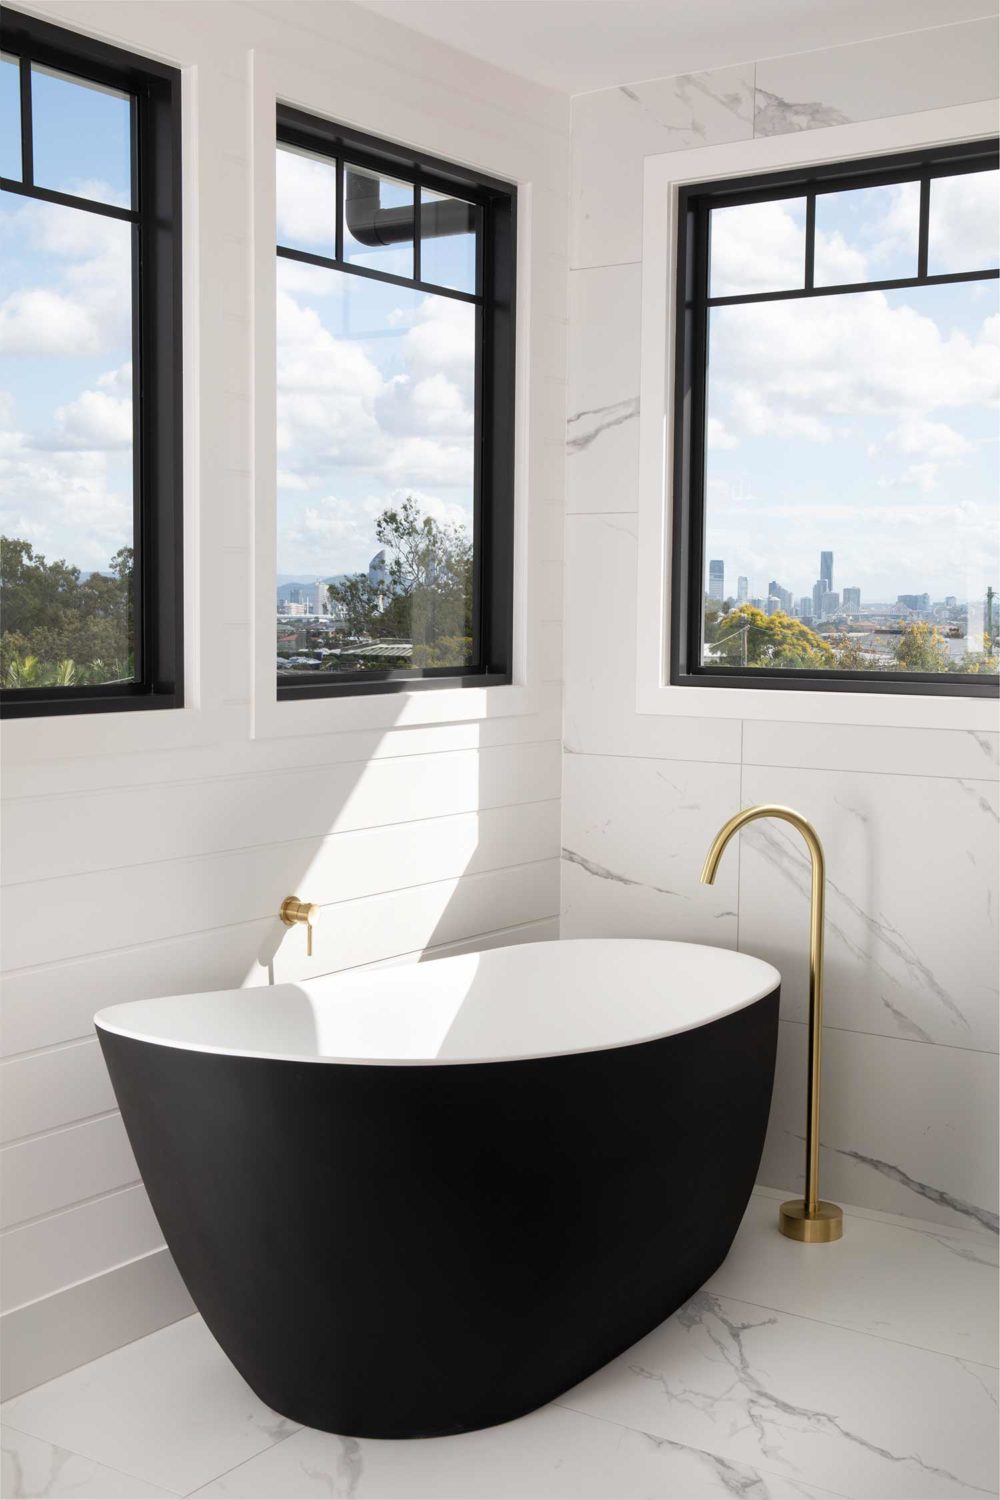 Black and White Bathrooms: Your Guide To Achieiving the Look | ABI ...